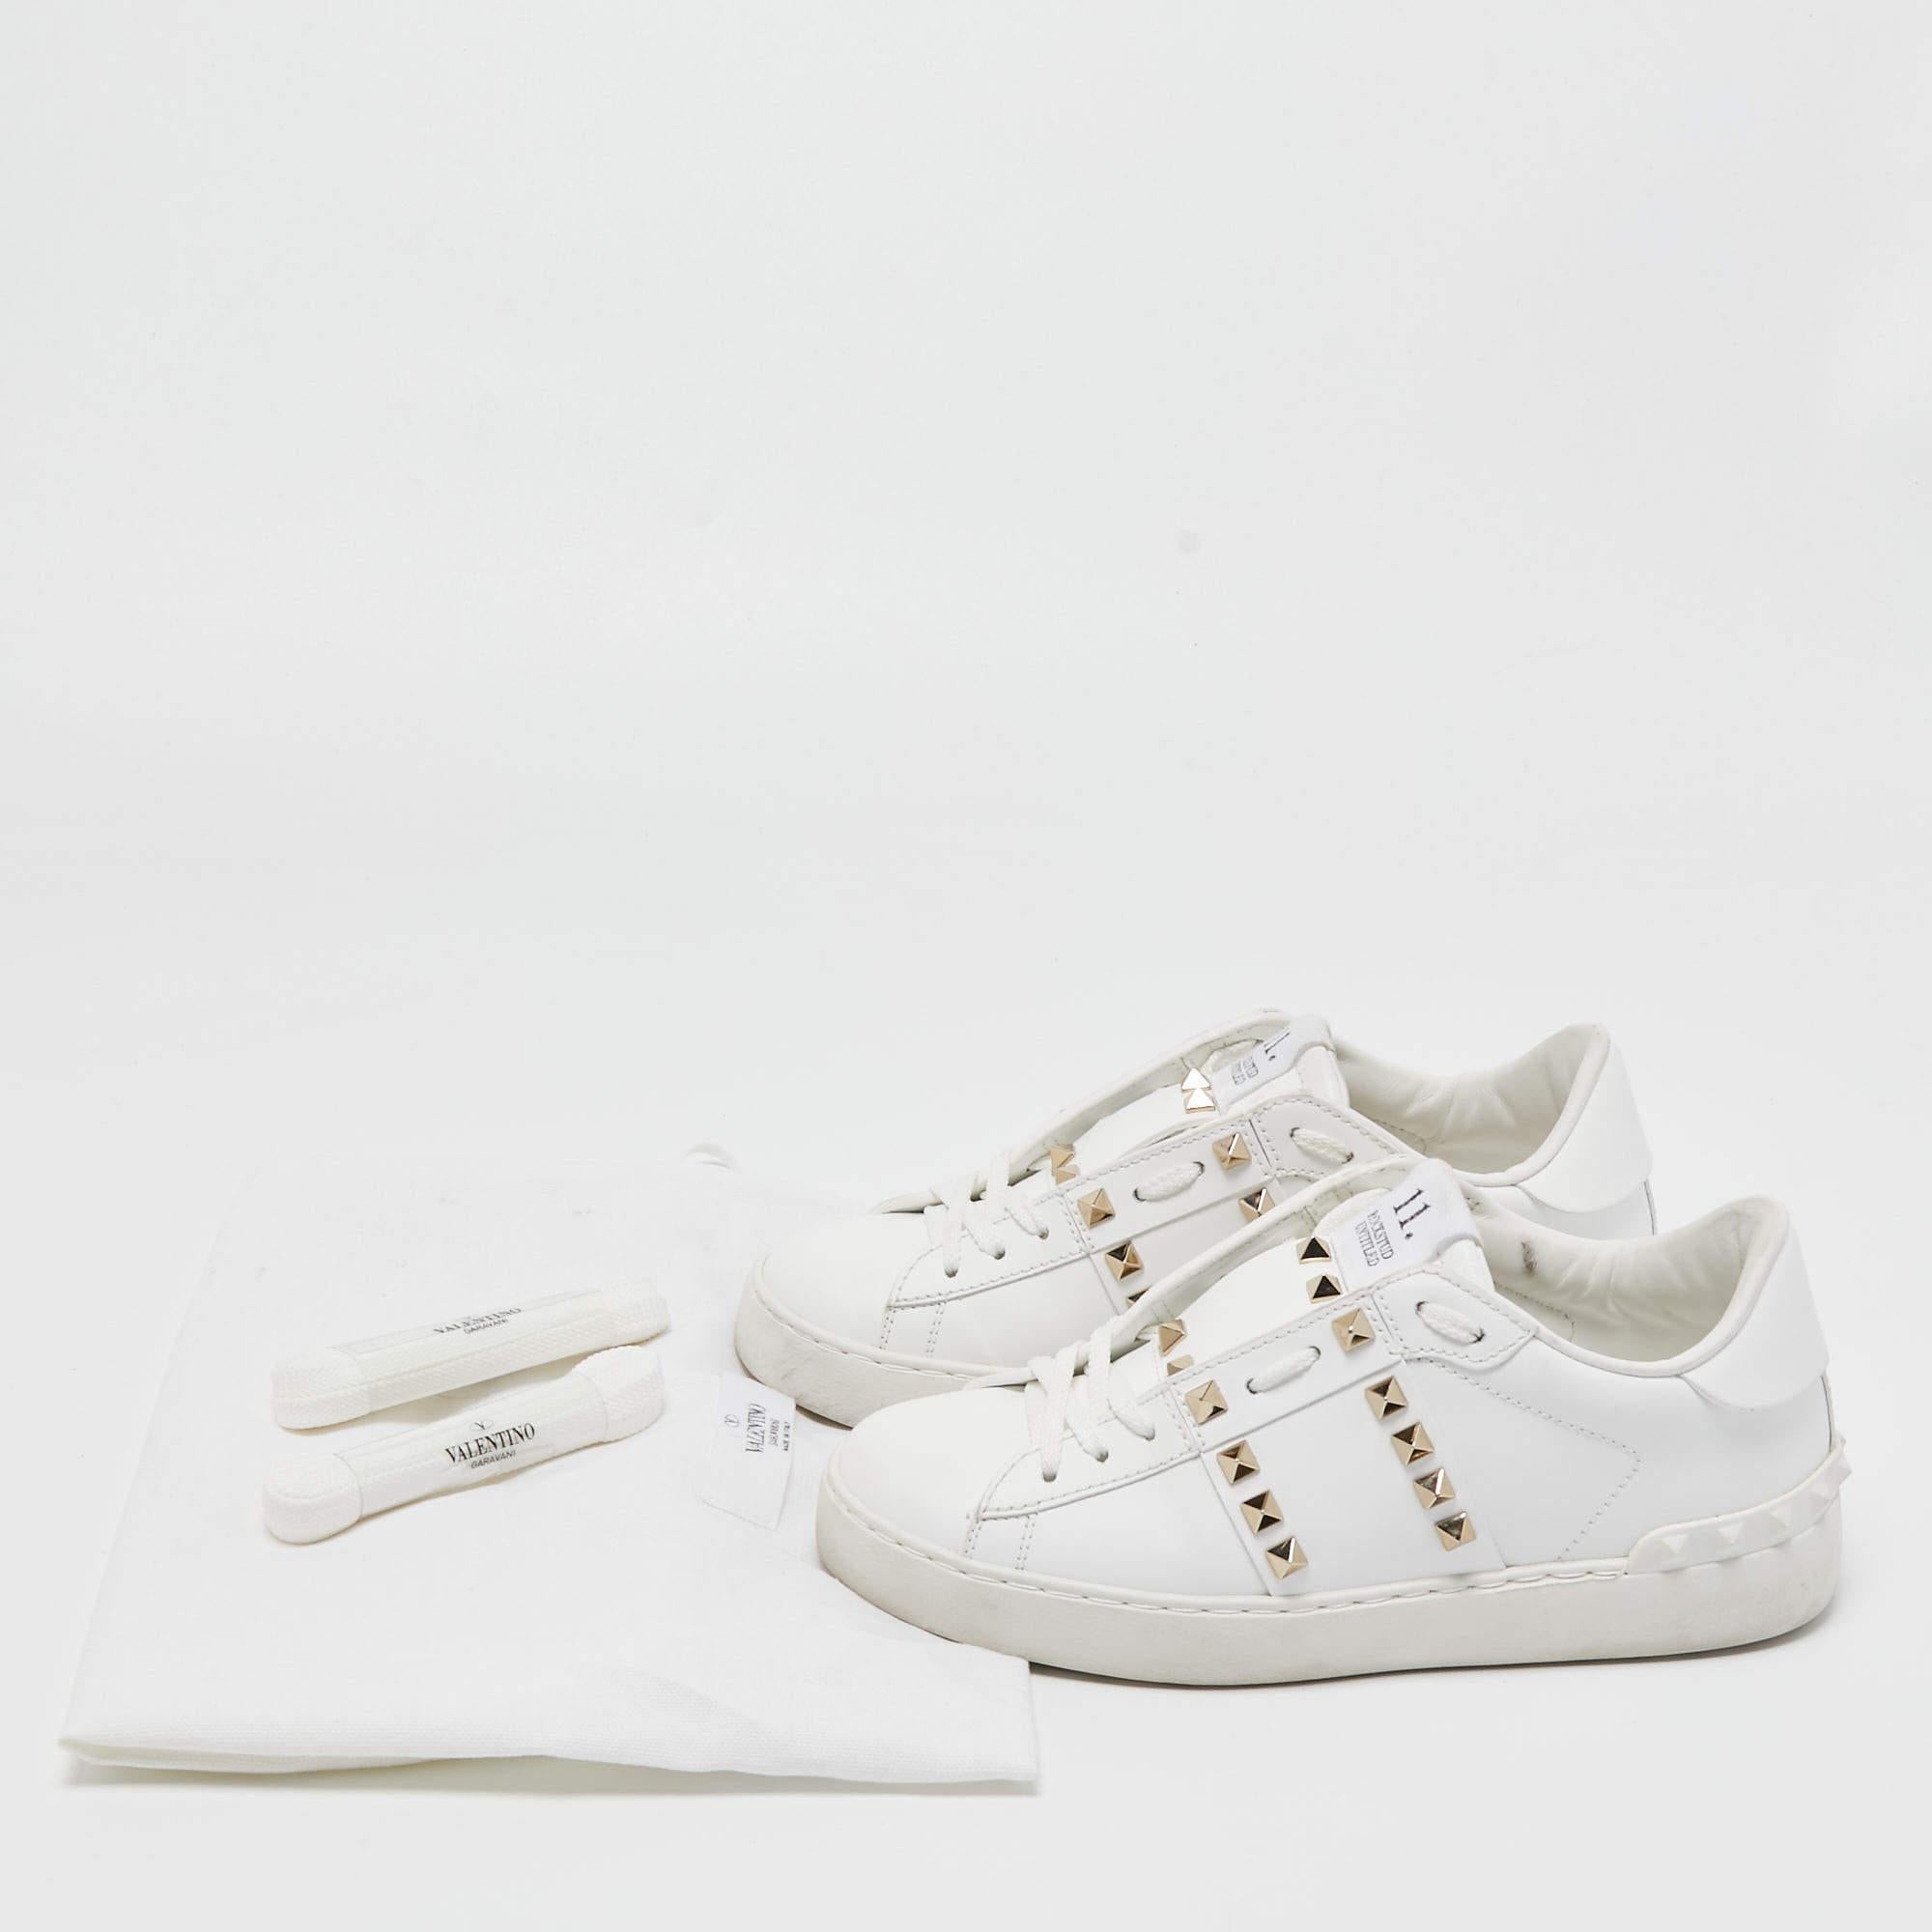 Valentino White Leather Rockstud Low Top Sneakers Size 35.5 6